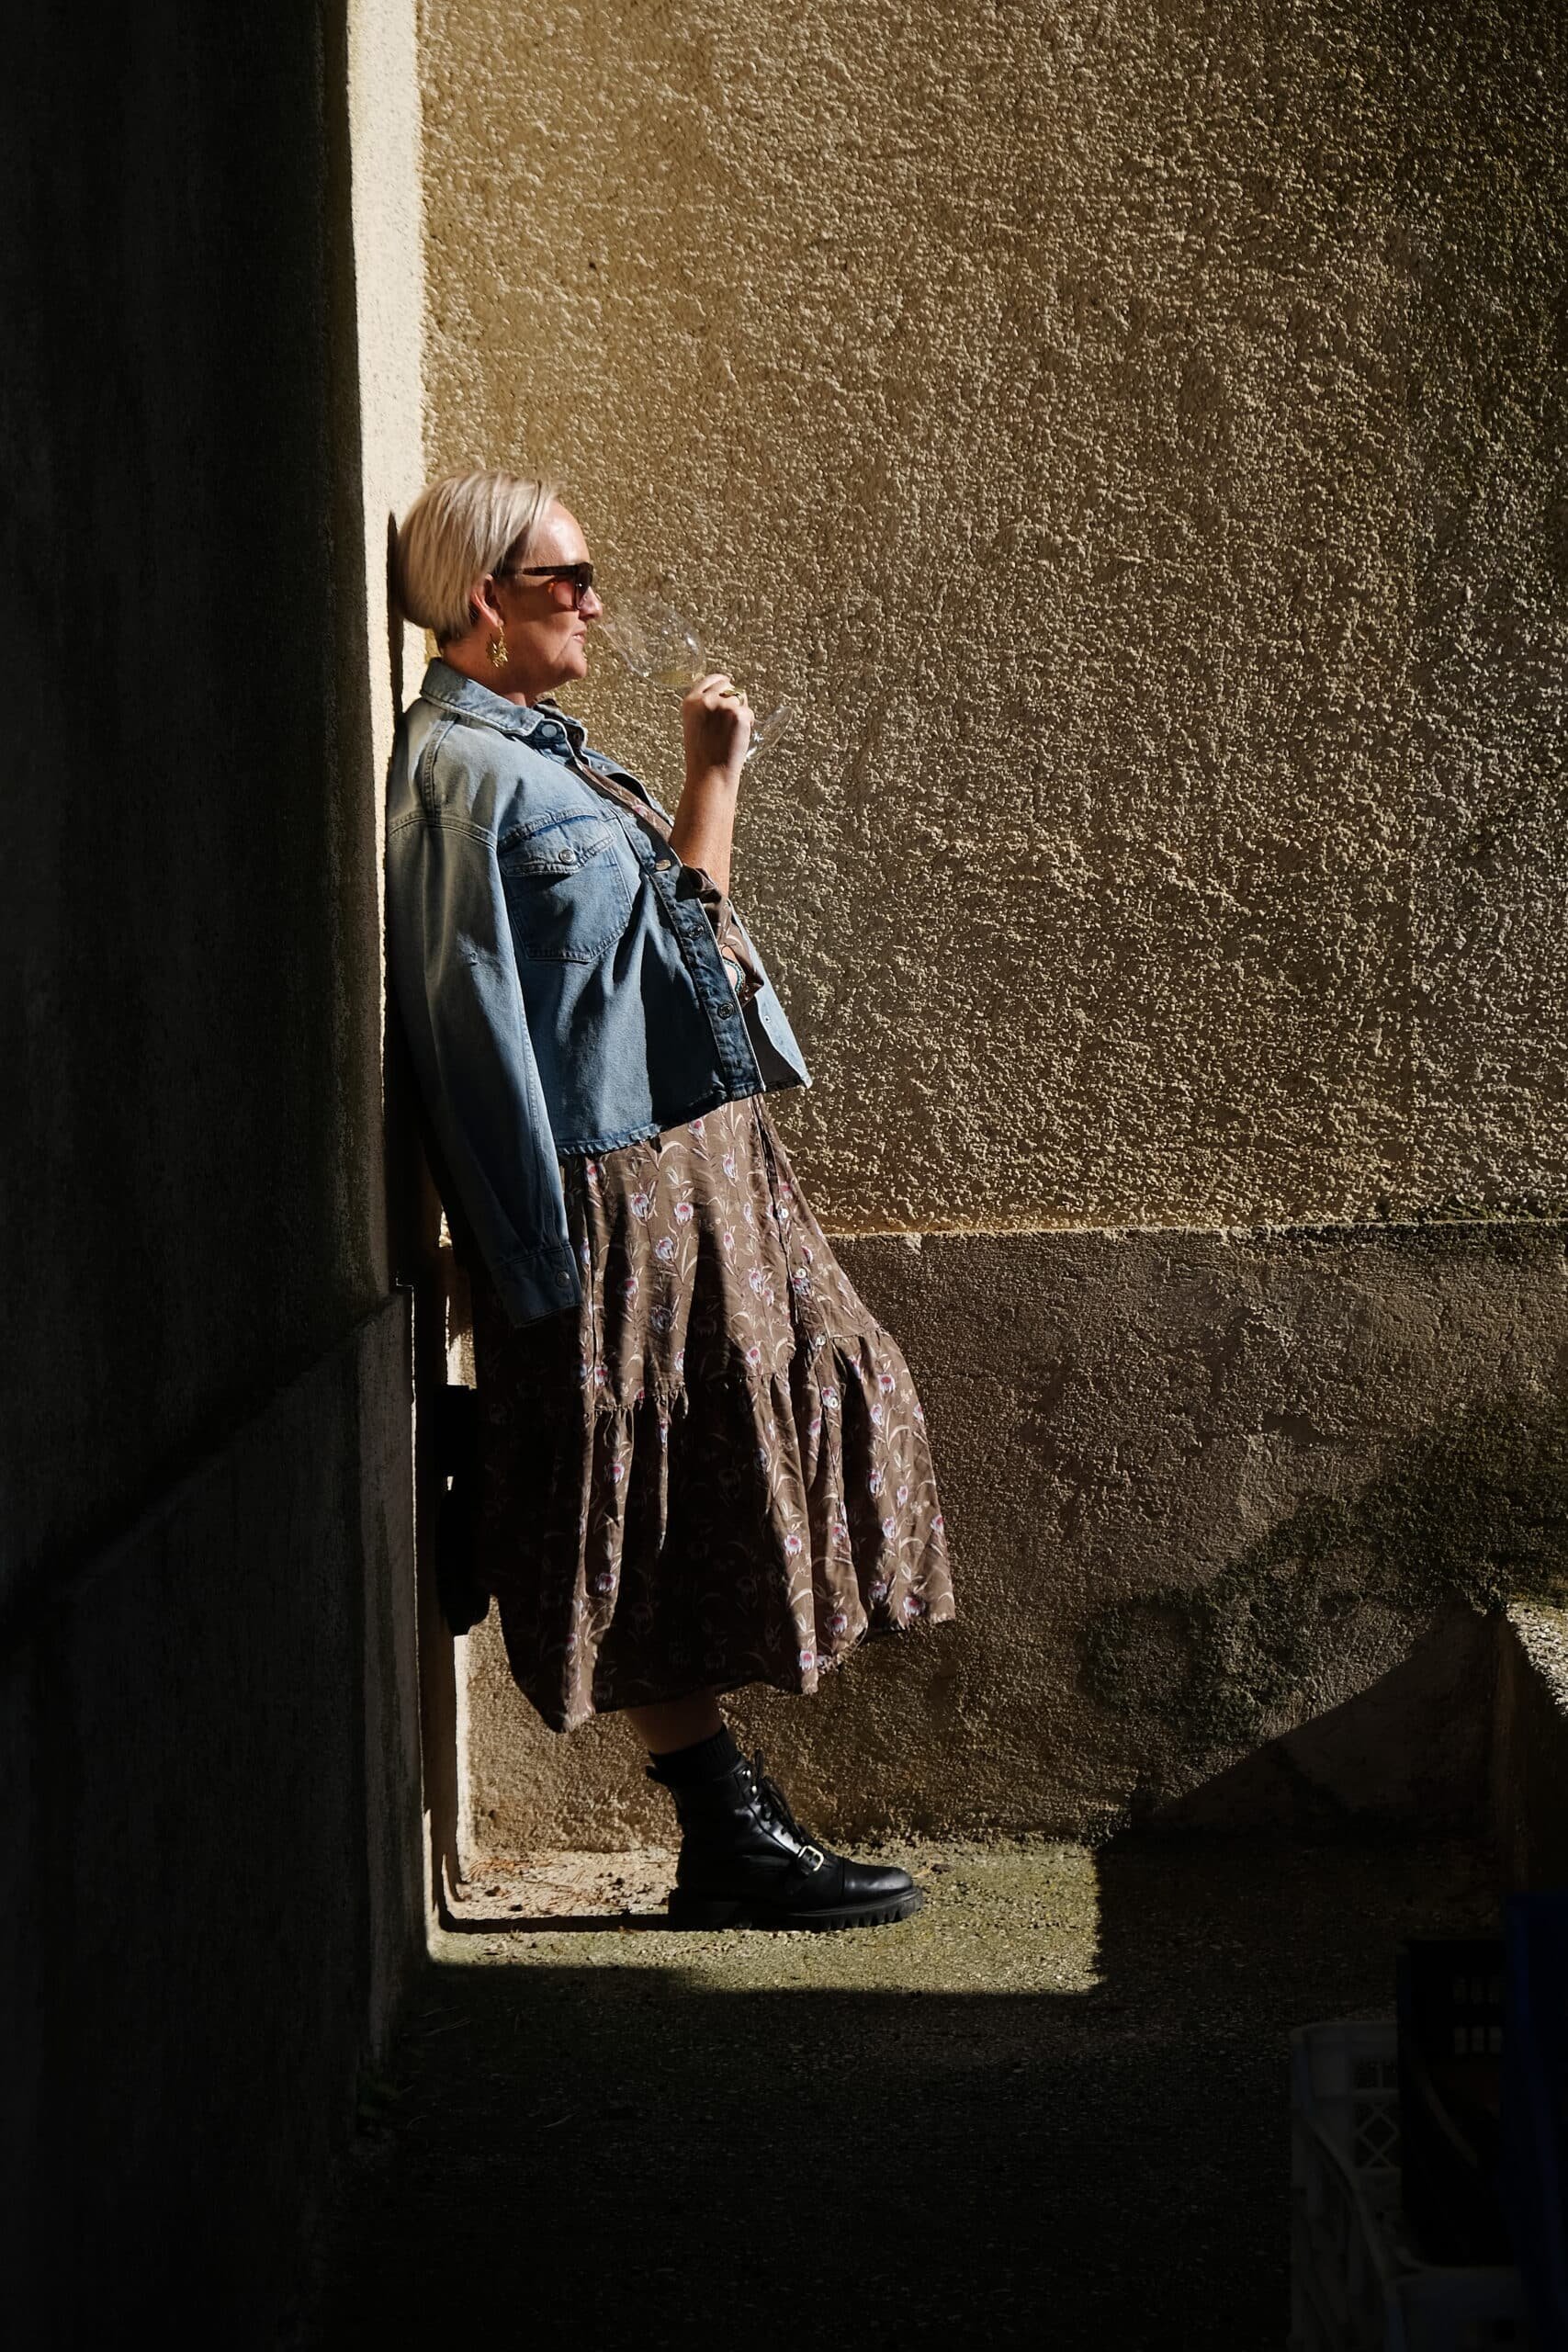 A woman istria leaning against a wall.